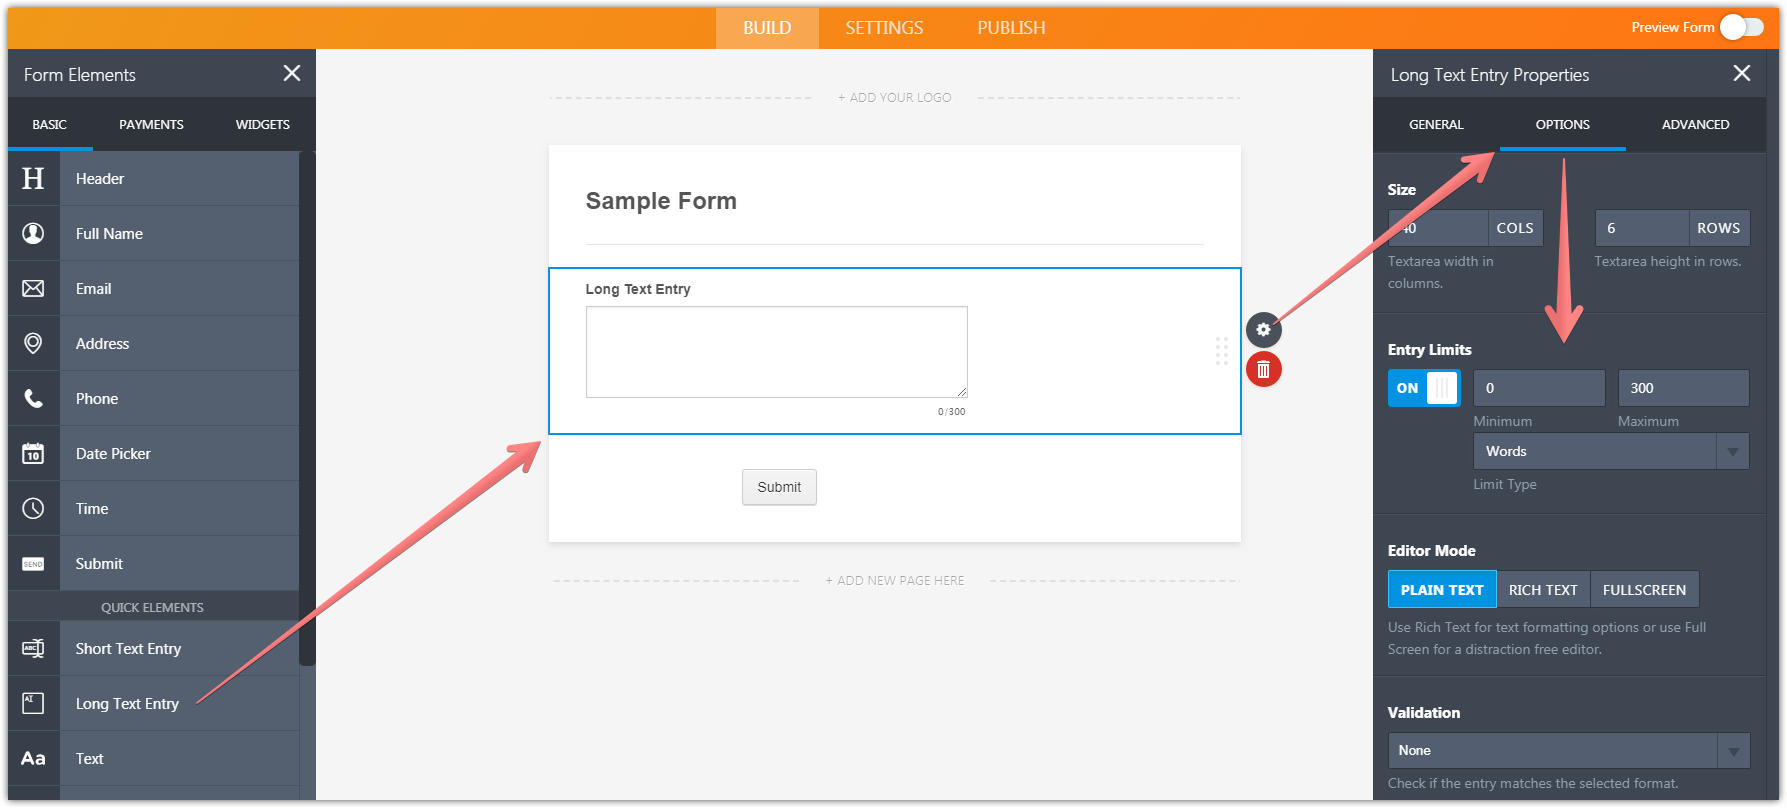 How to set entry limits Image 1 Screenshot 20